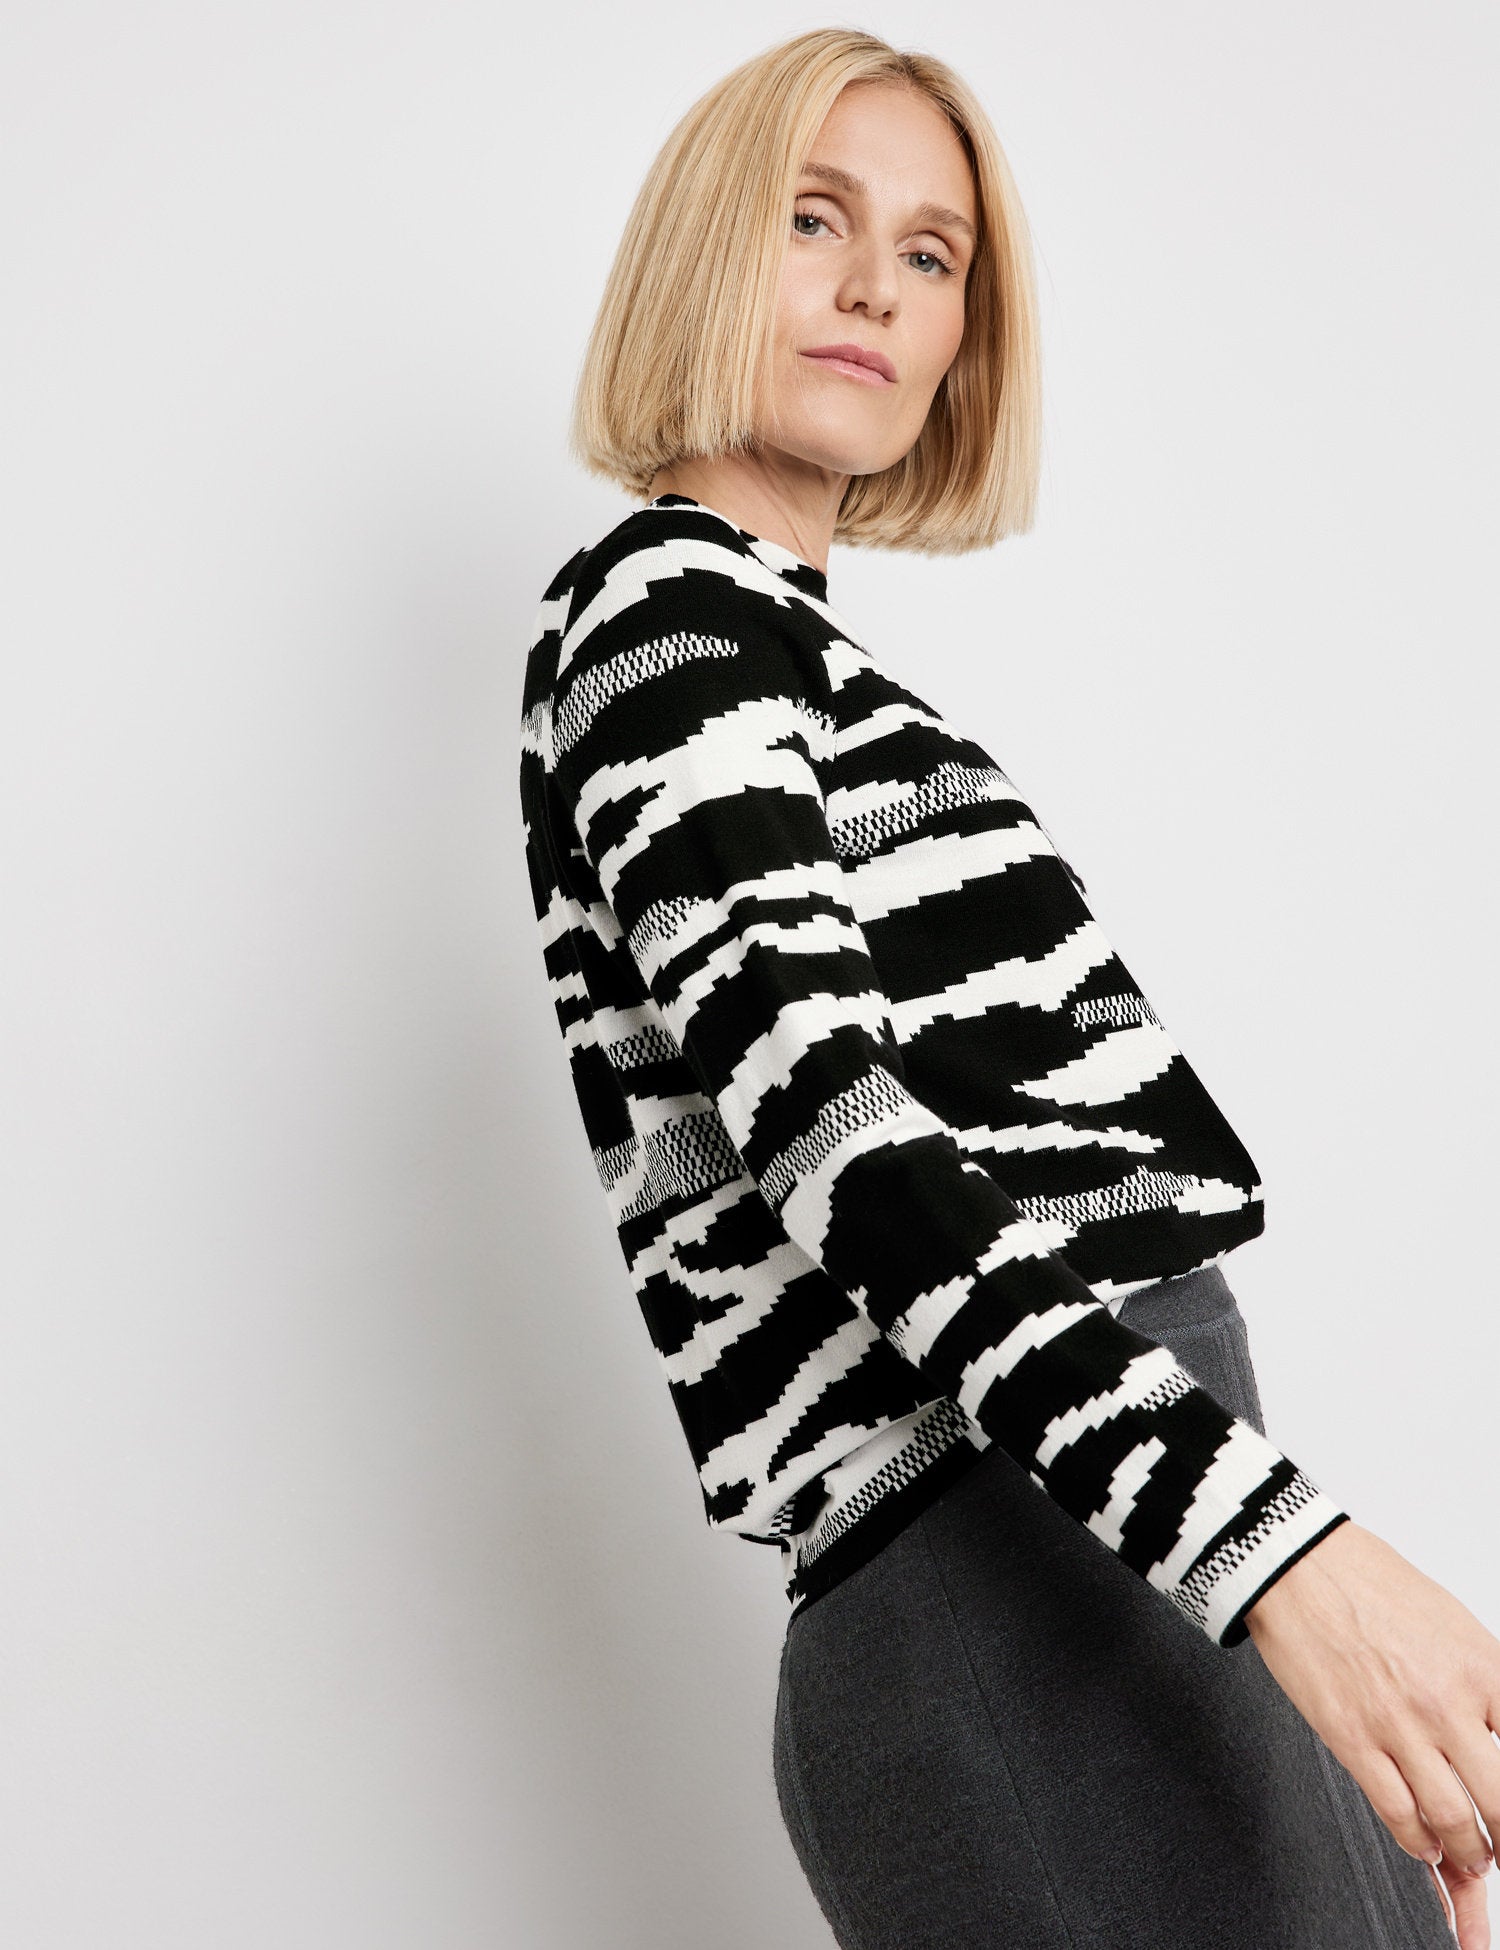 Jacquard Knit Jumper With A Short Stand-Up Collar_170587-44713_1090_05